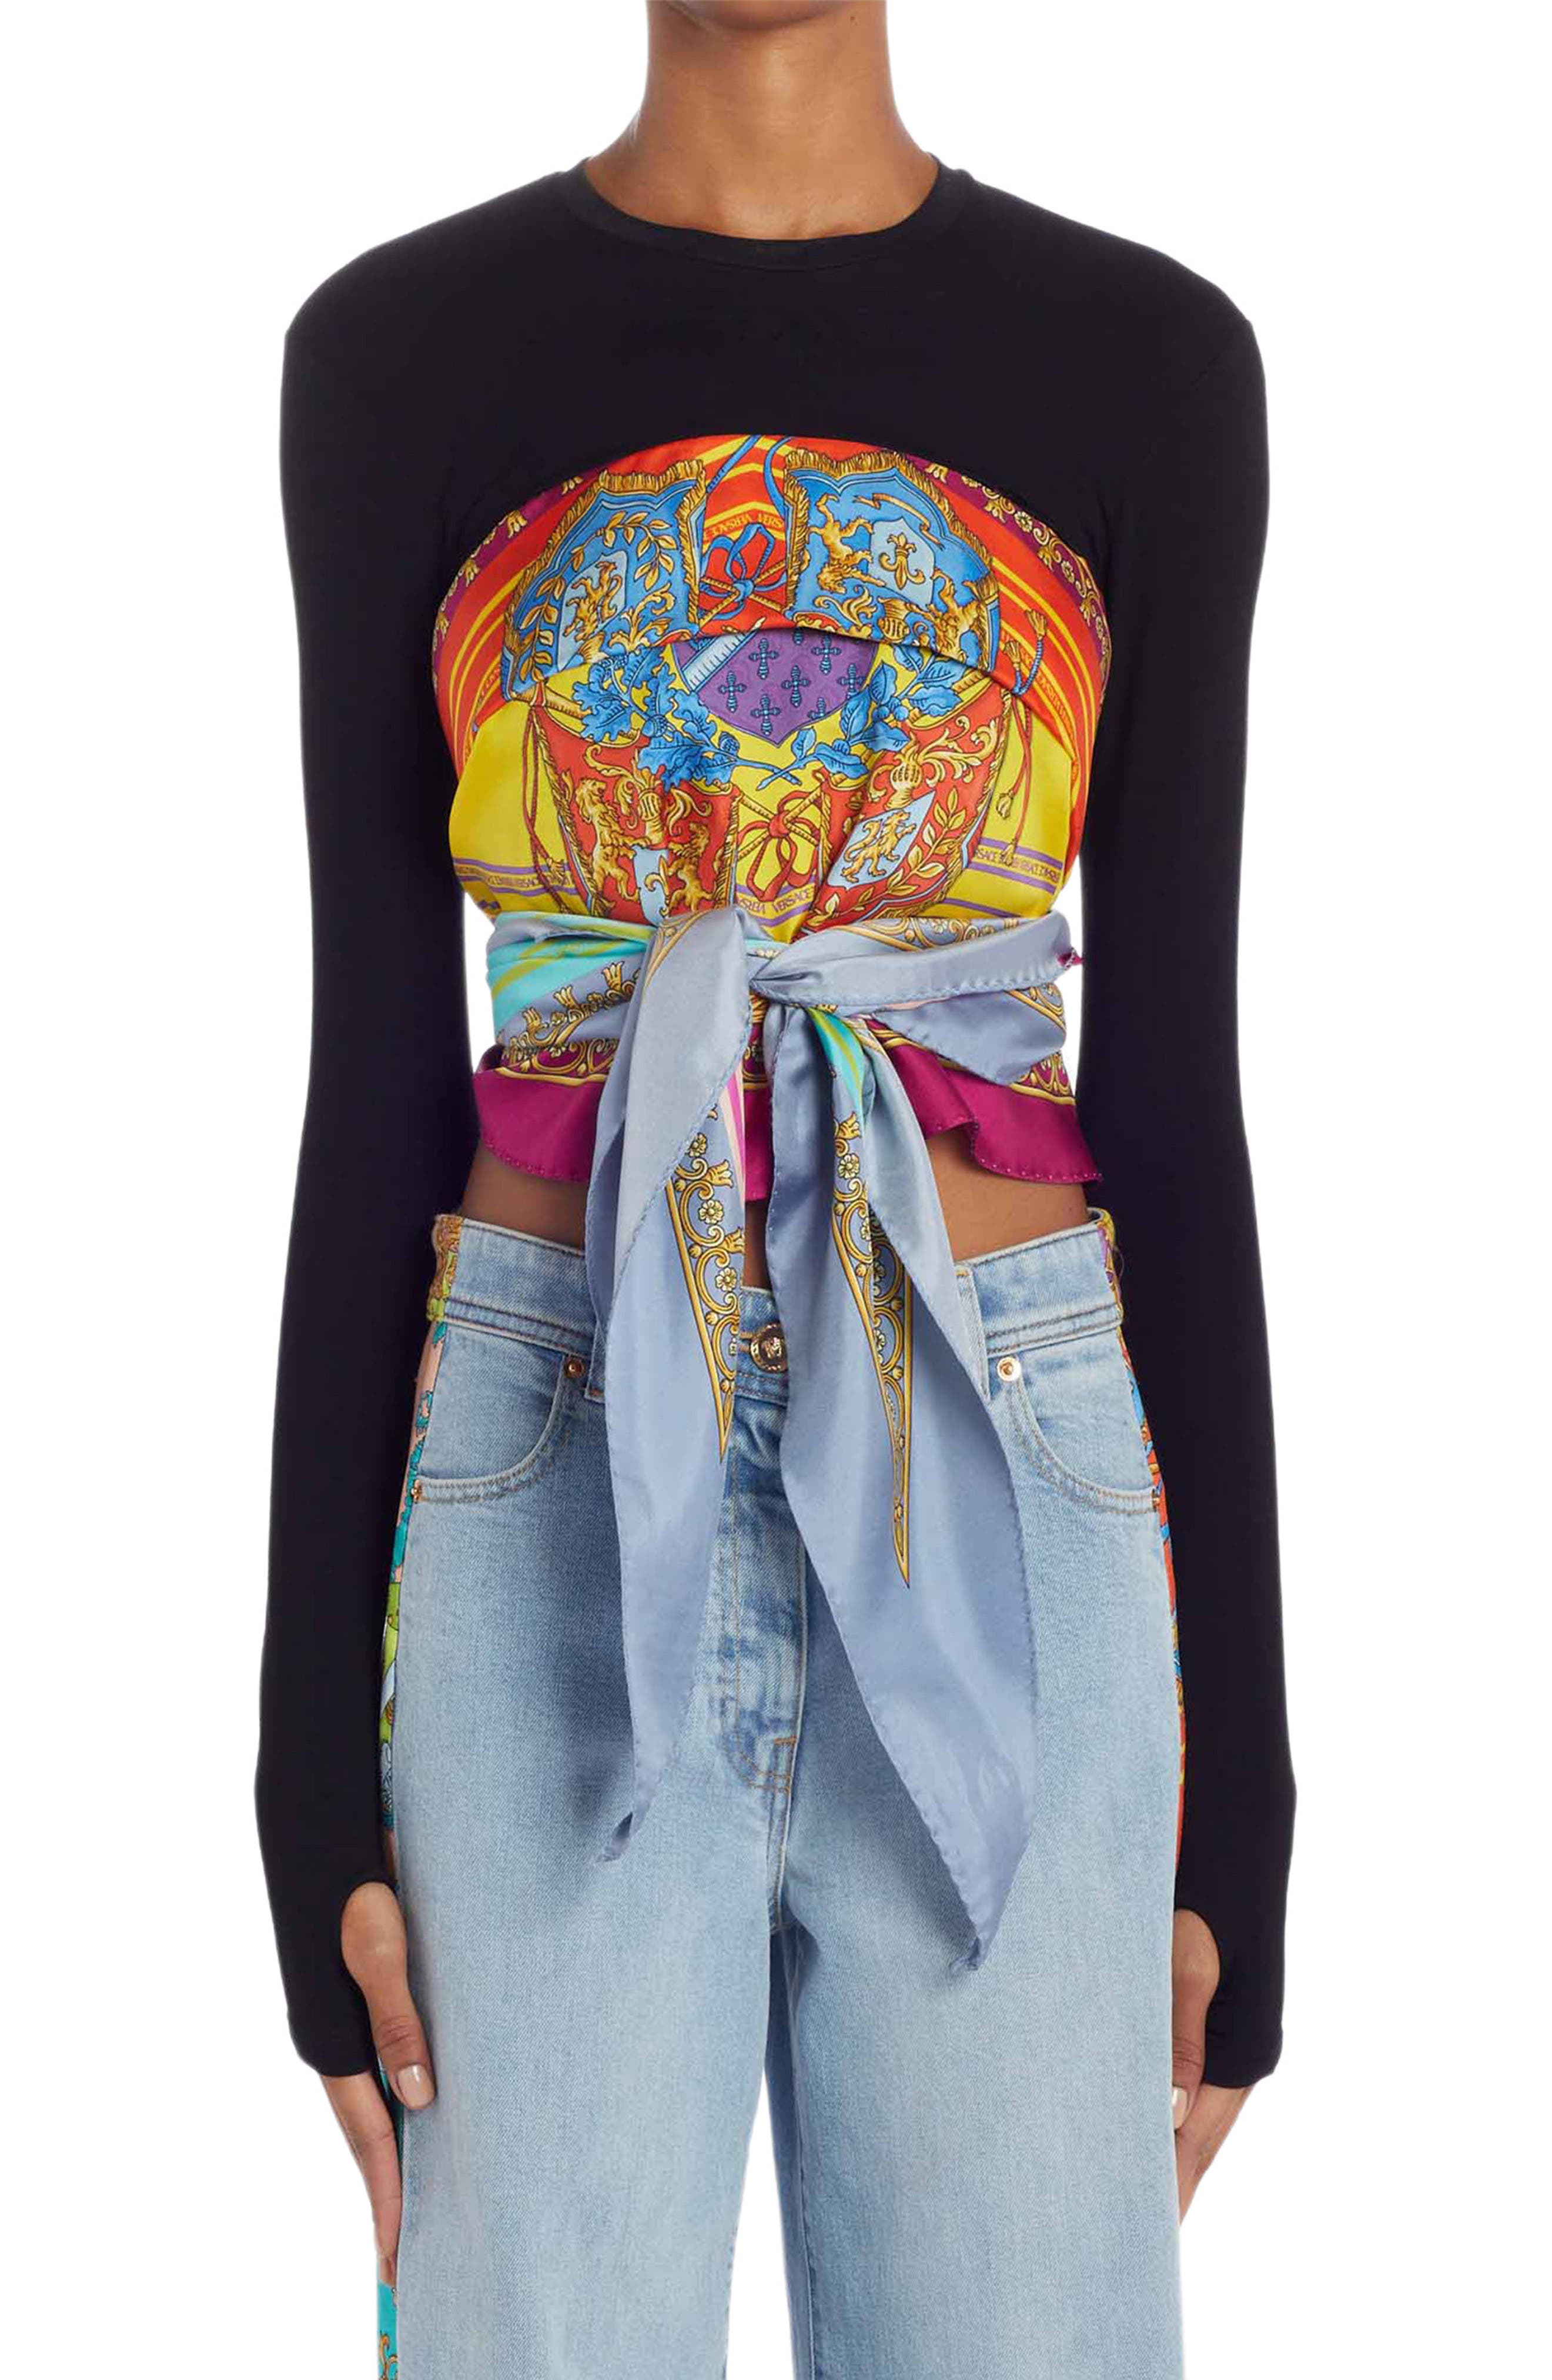 VERSACE Mixed Media Long Sleeve Scarf Blouse in Black Multicolor